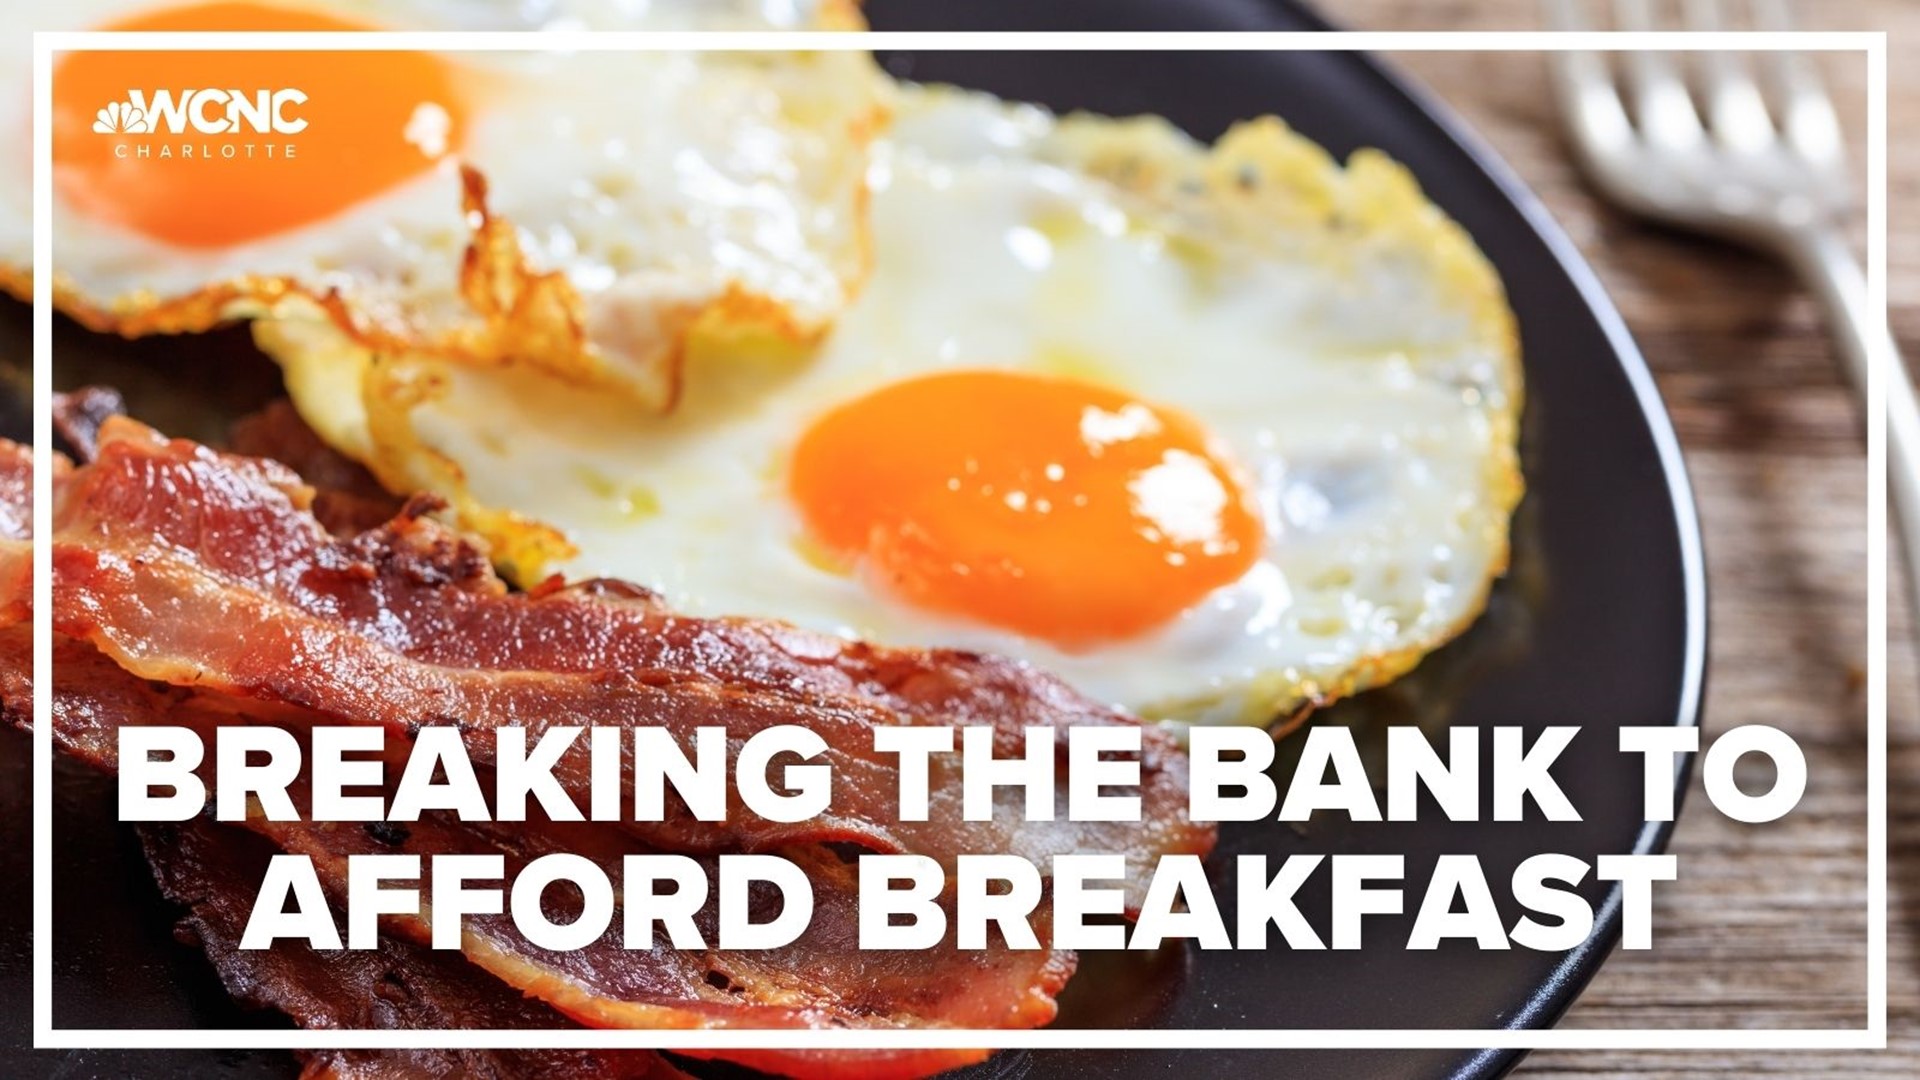 Food prices continue to rise across the board, especially the breakfast basics.